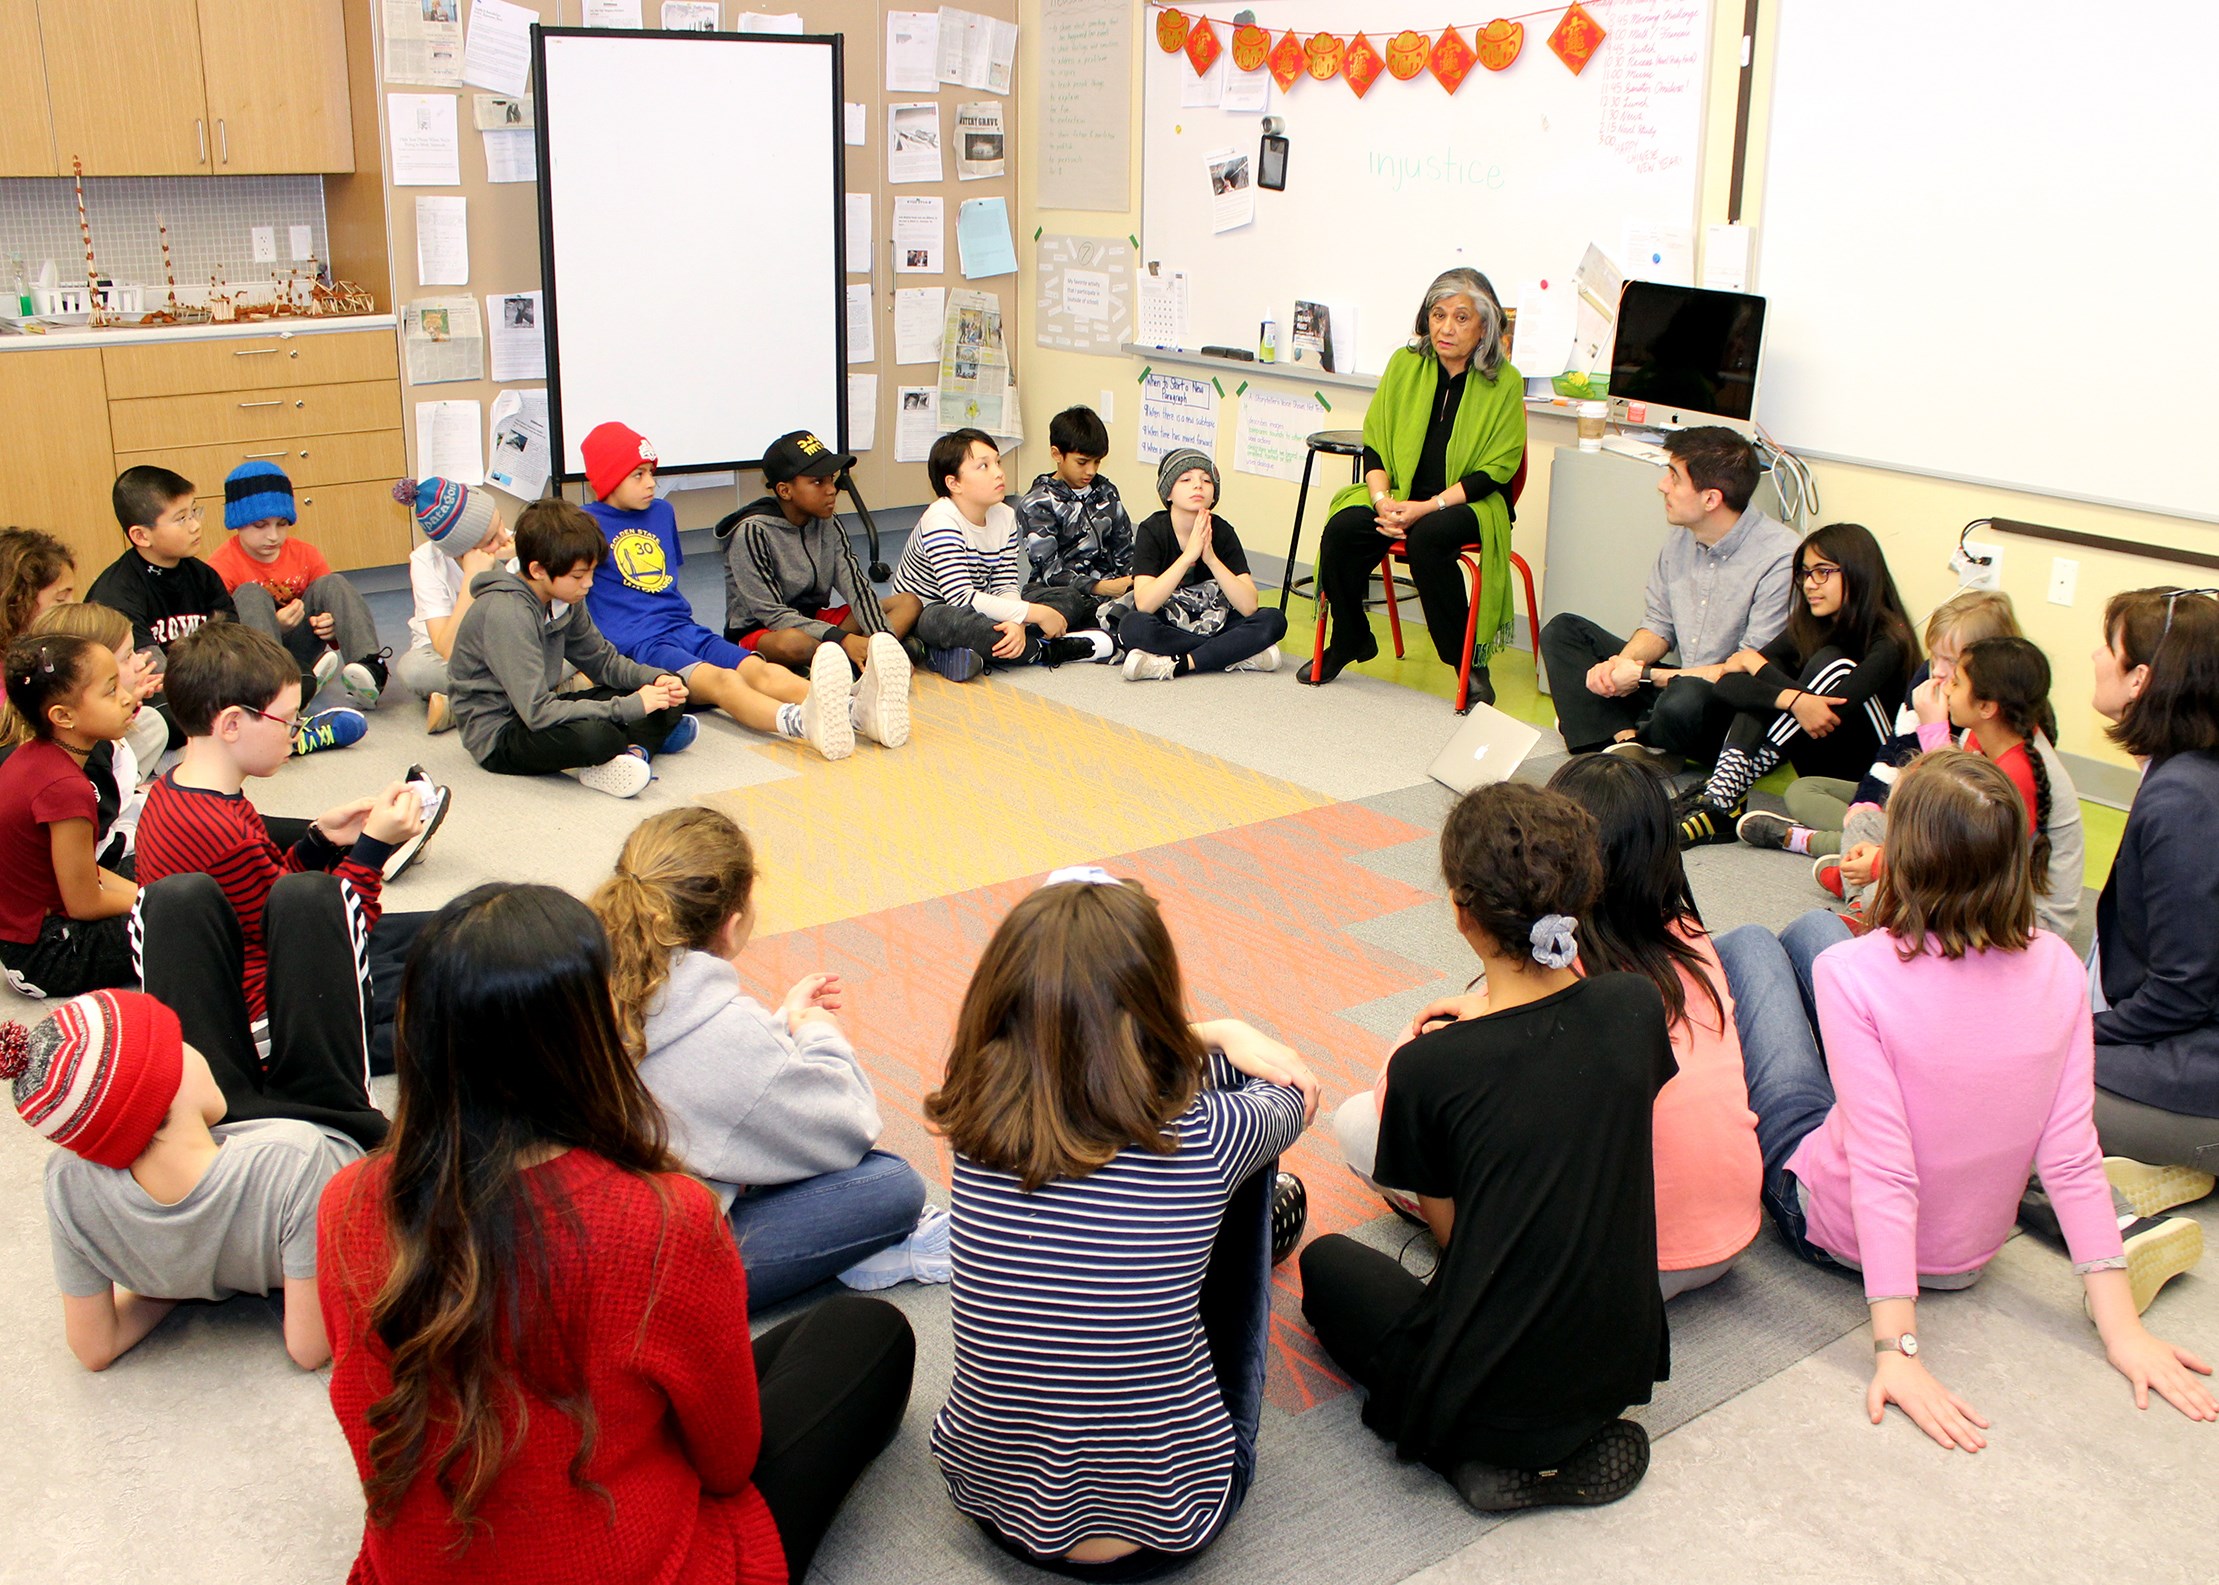 Thursday, February 7 – Senator Ratna Omidvar visits students at the Laboratory School at the Dr. Eric Jackman Institute of Child Study in Toronto to chat about their passions and issues important to them, such as climate change and homelessness.